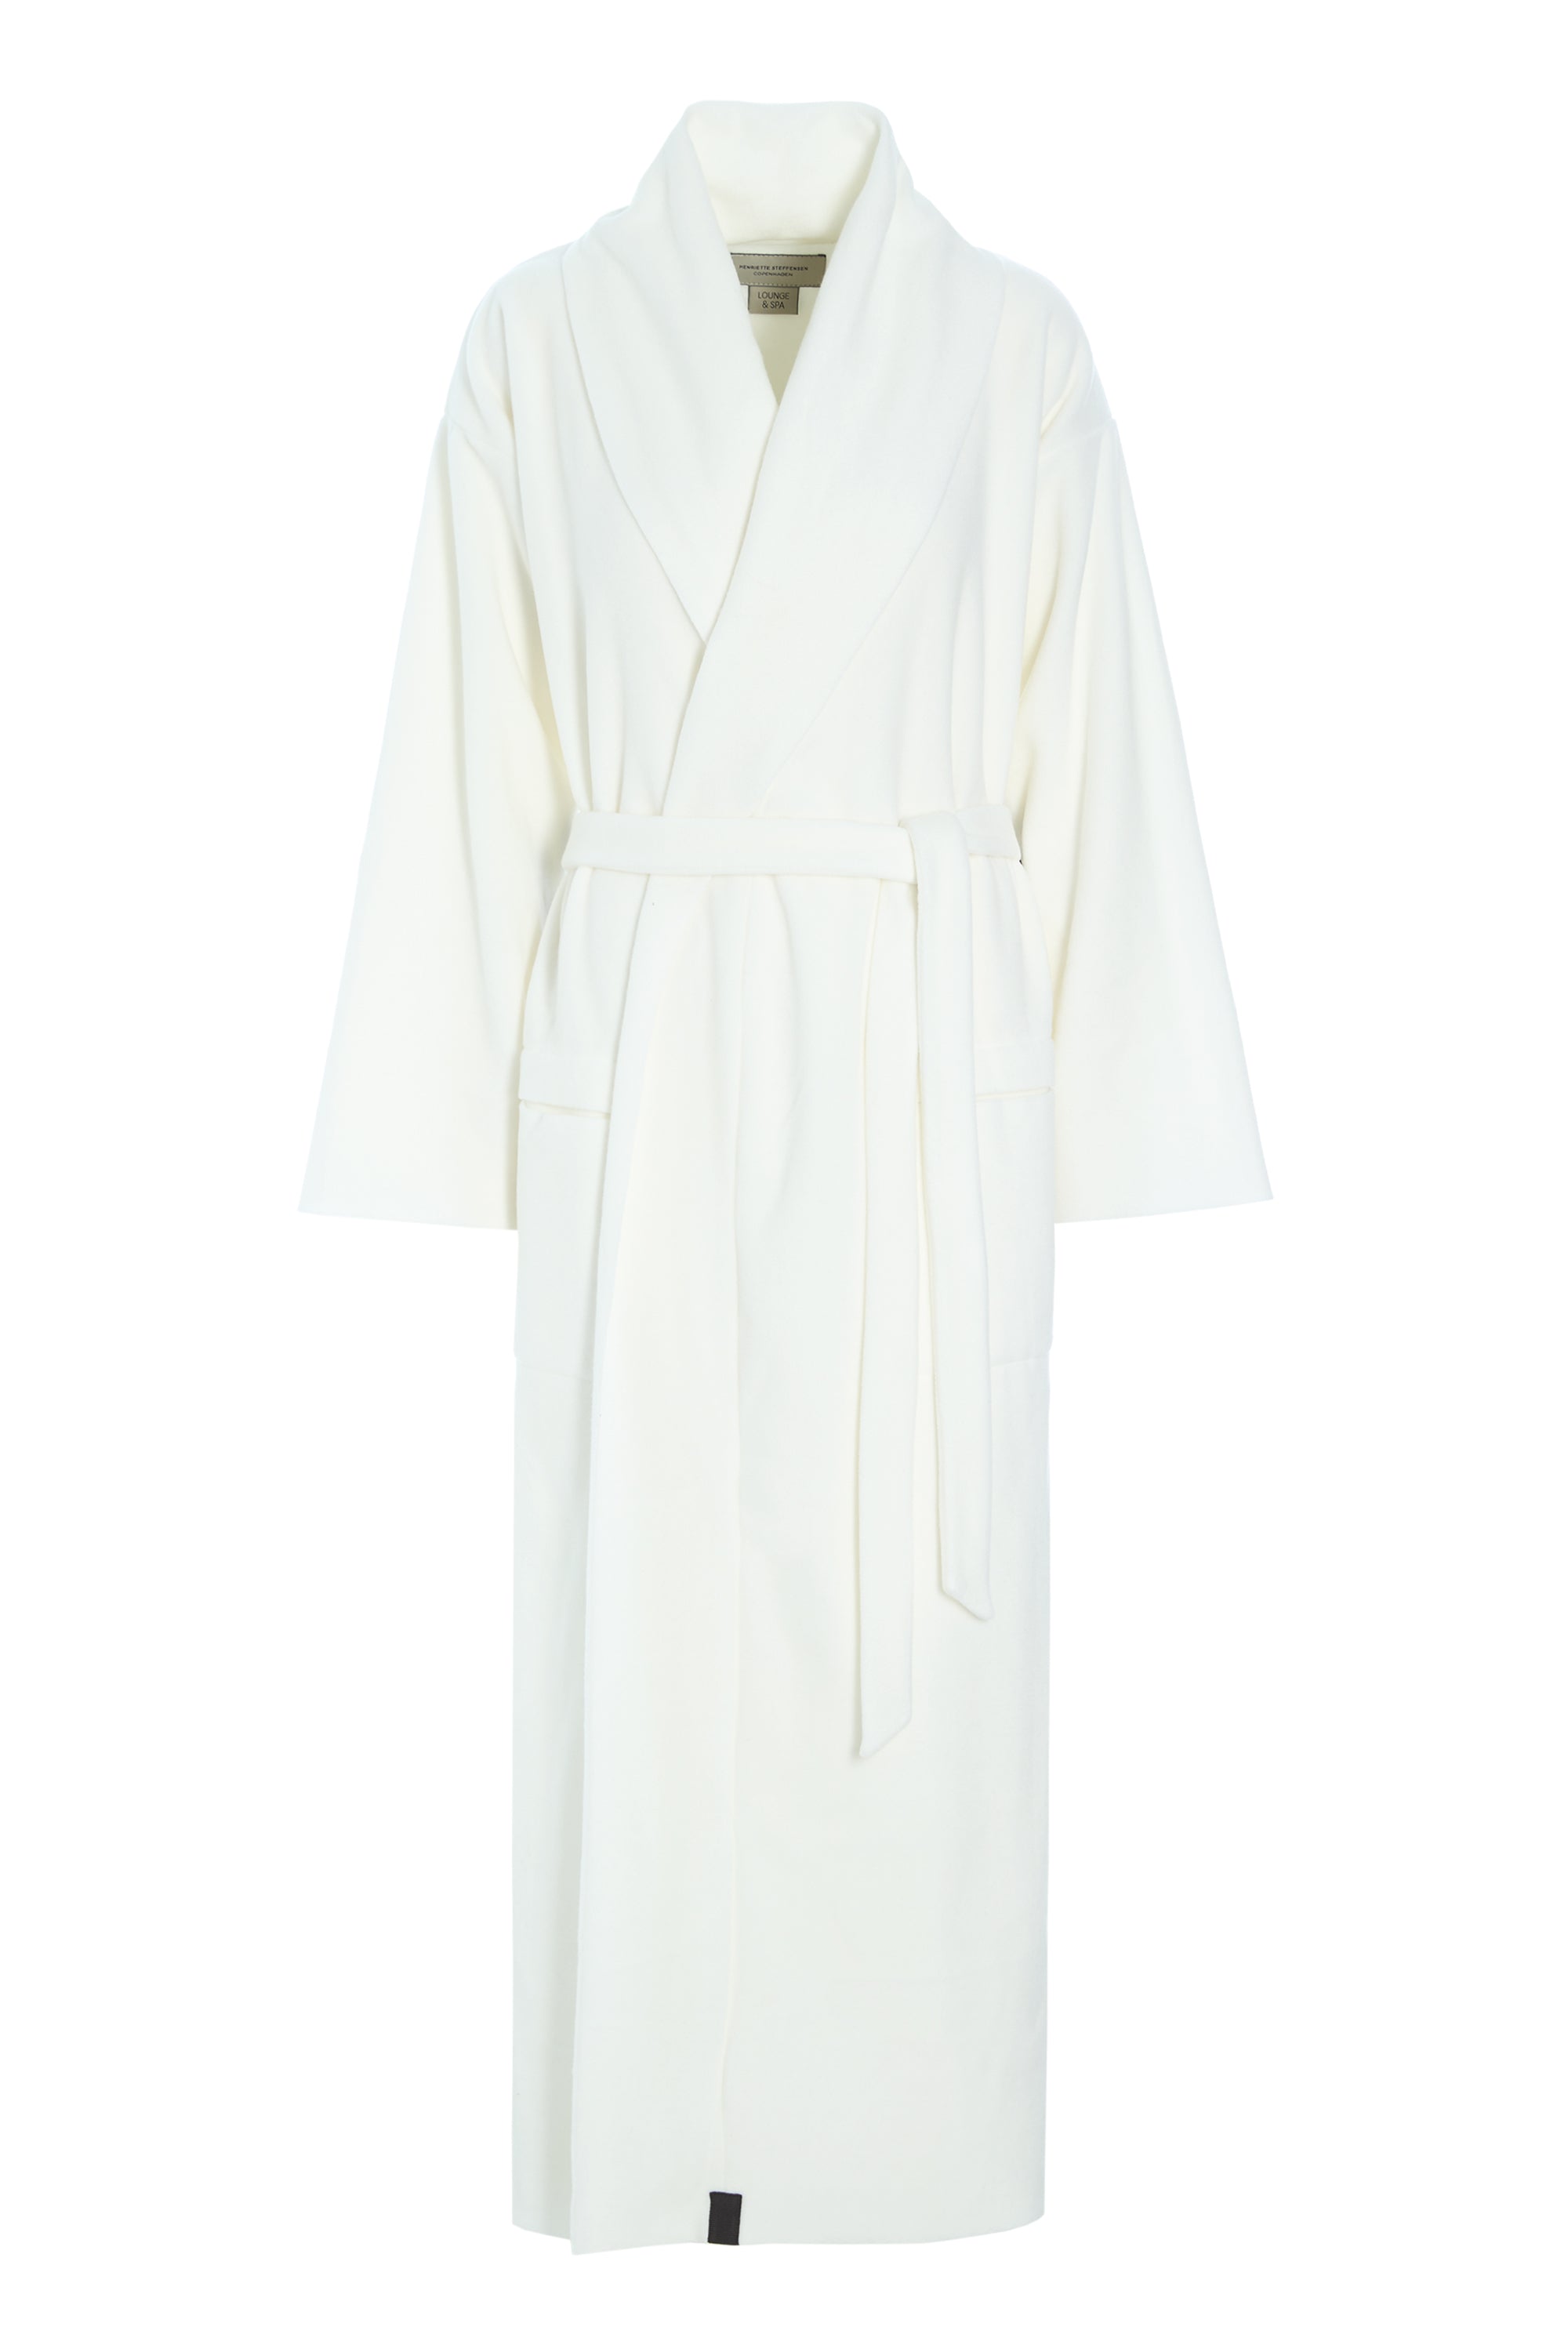 Premium Bathrobes :: Terry Bathrobes :: Terry Hooded Robes :: 100% Turkish  Cotton White Heavy Weight Hooded Terry Bathrobe - Turquaz Linen, Towels,  Robes, Linen and More!